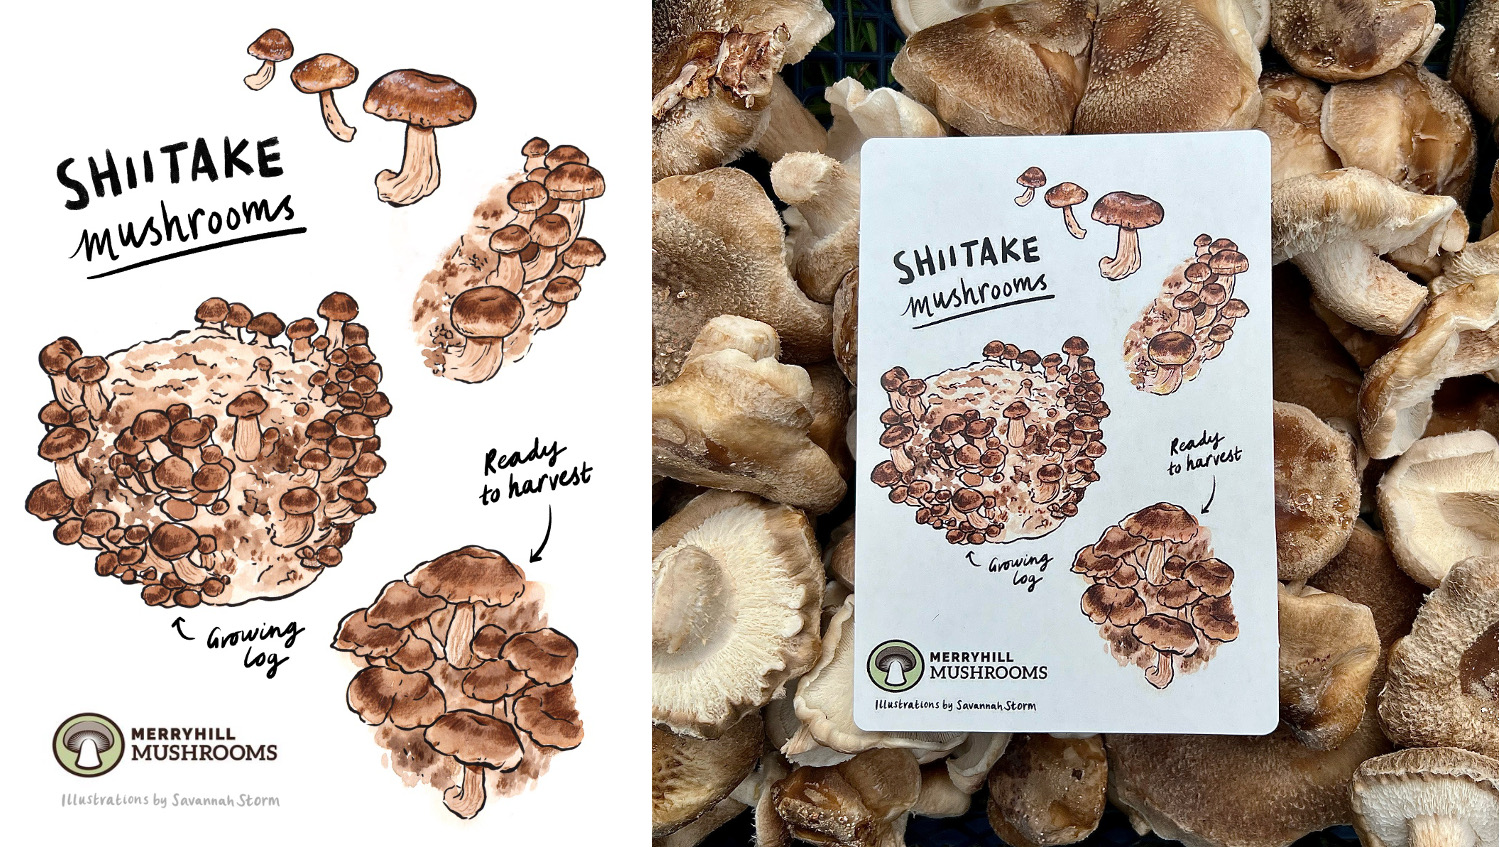 Infographic showing various illustrations of shiitake mushrooms, labelled with handwritten typography. Printed onto a postcard.